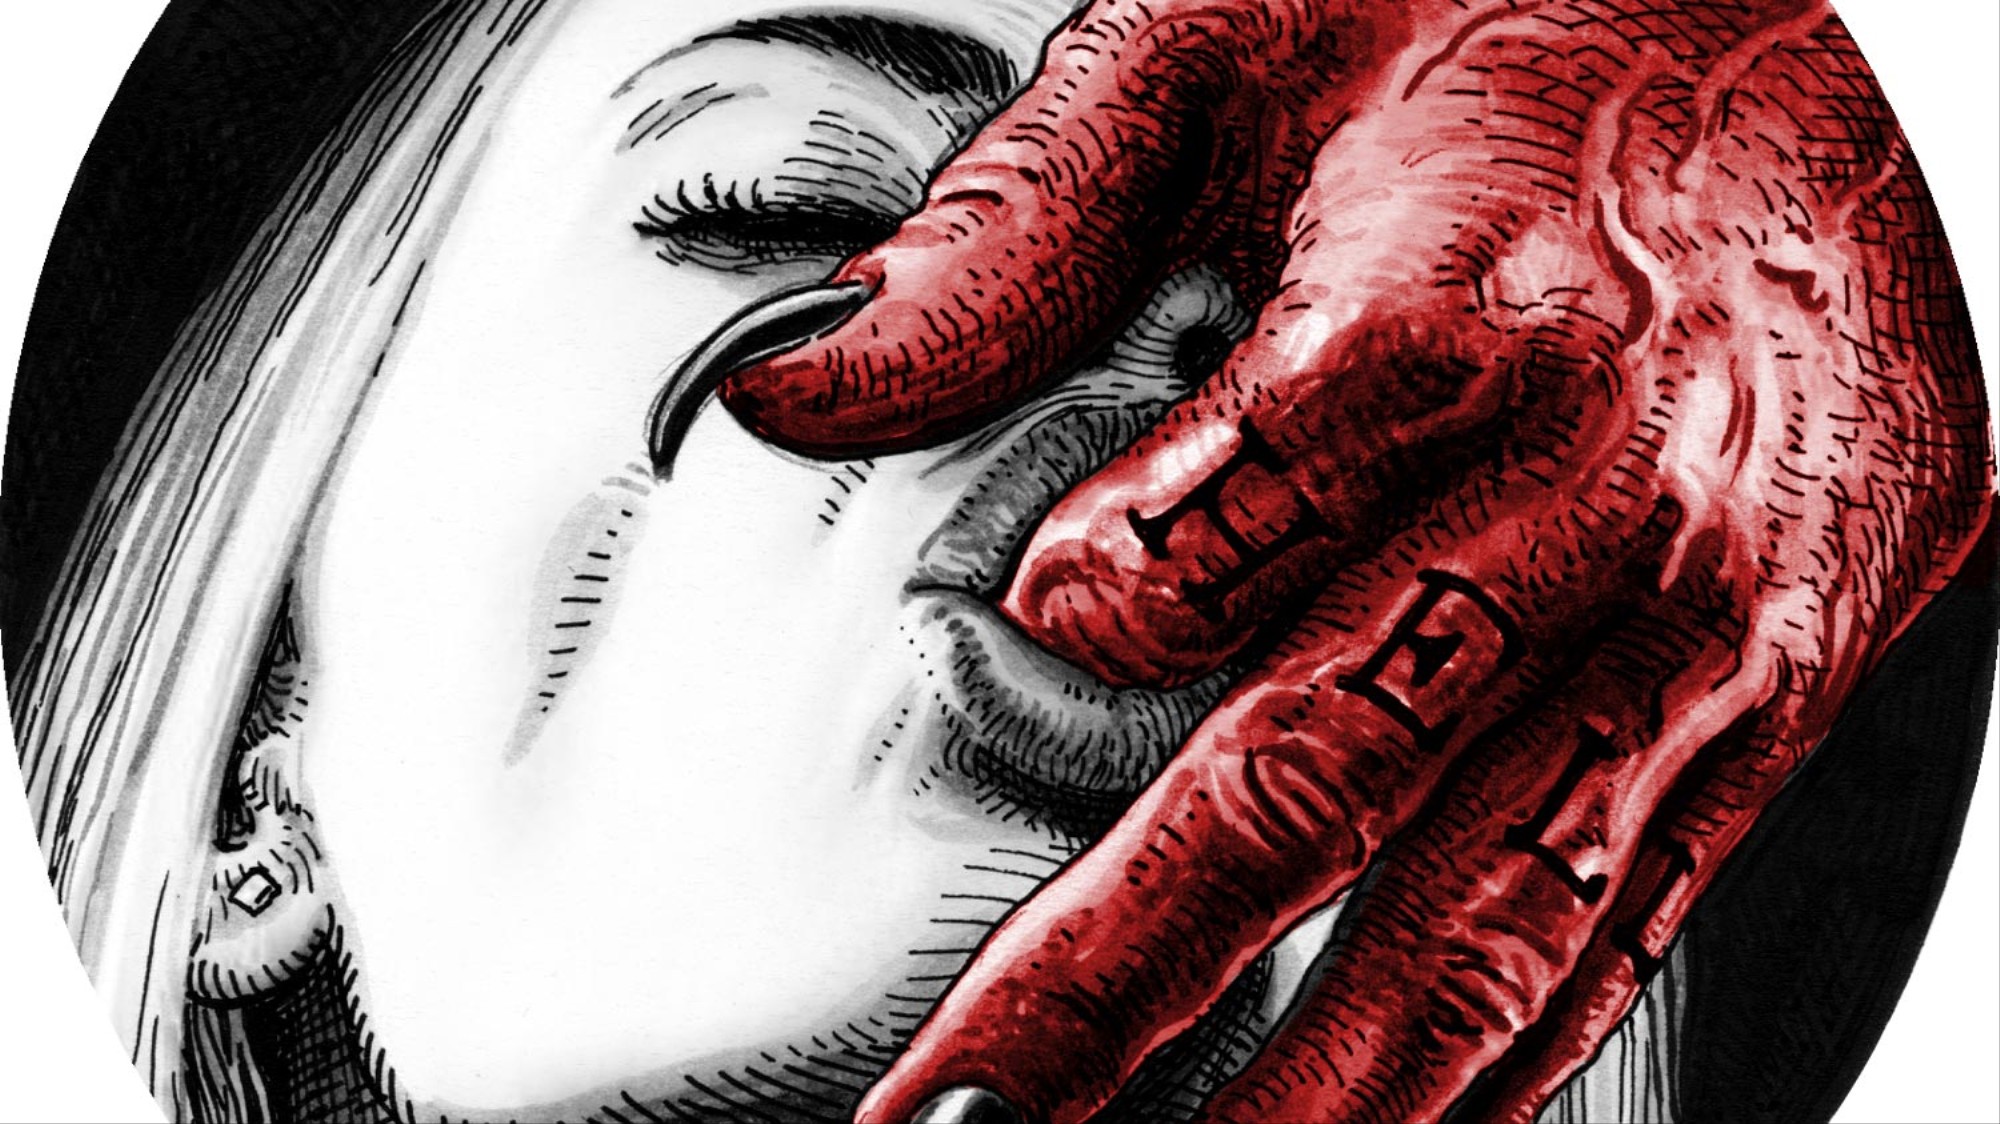 Cartoon Demon Sex Tumblr - NSFW] These Devilish Illustrations Are Sinfully Sexy - VICE